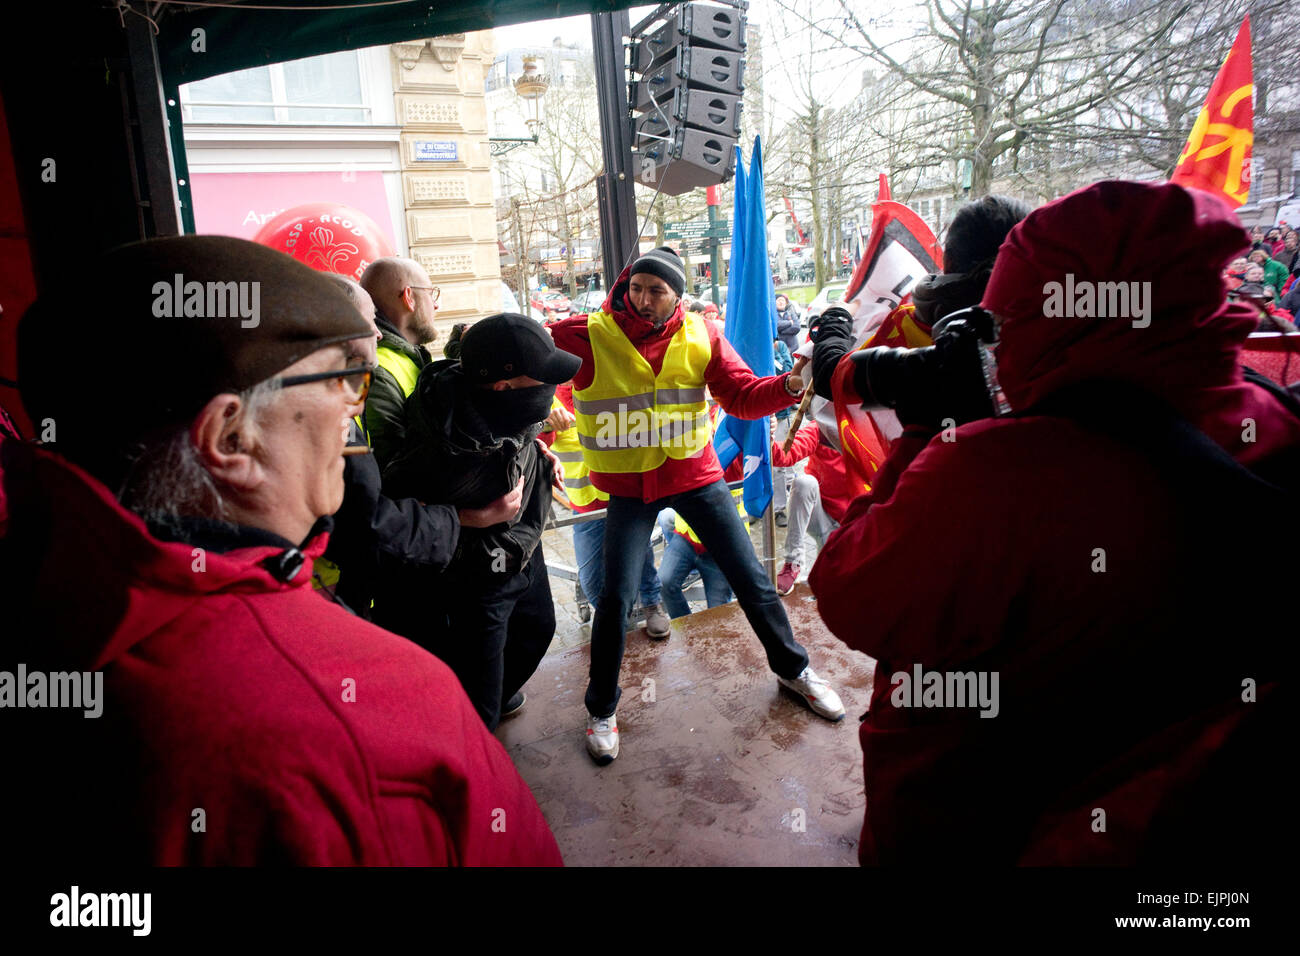 Brussels, Belgium. 30th Mar, 2015. A masked man tries to disrupt an union union leader's speech by storming the stage. -Thousands took part in an anti austerity demonstration organized by multiple workers' unions and political parties. Clash broke out as members of 'LCR' (Revolutionary Communist League of Belgium) tries to take over the stage. Credit:  Geovien So/Pacific Press/Alamy Live News Stock Photo